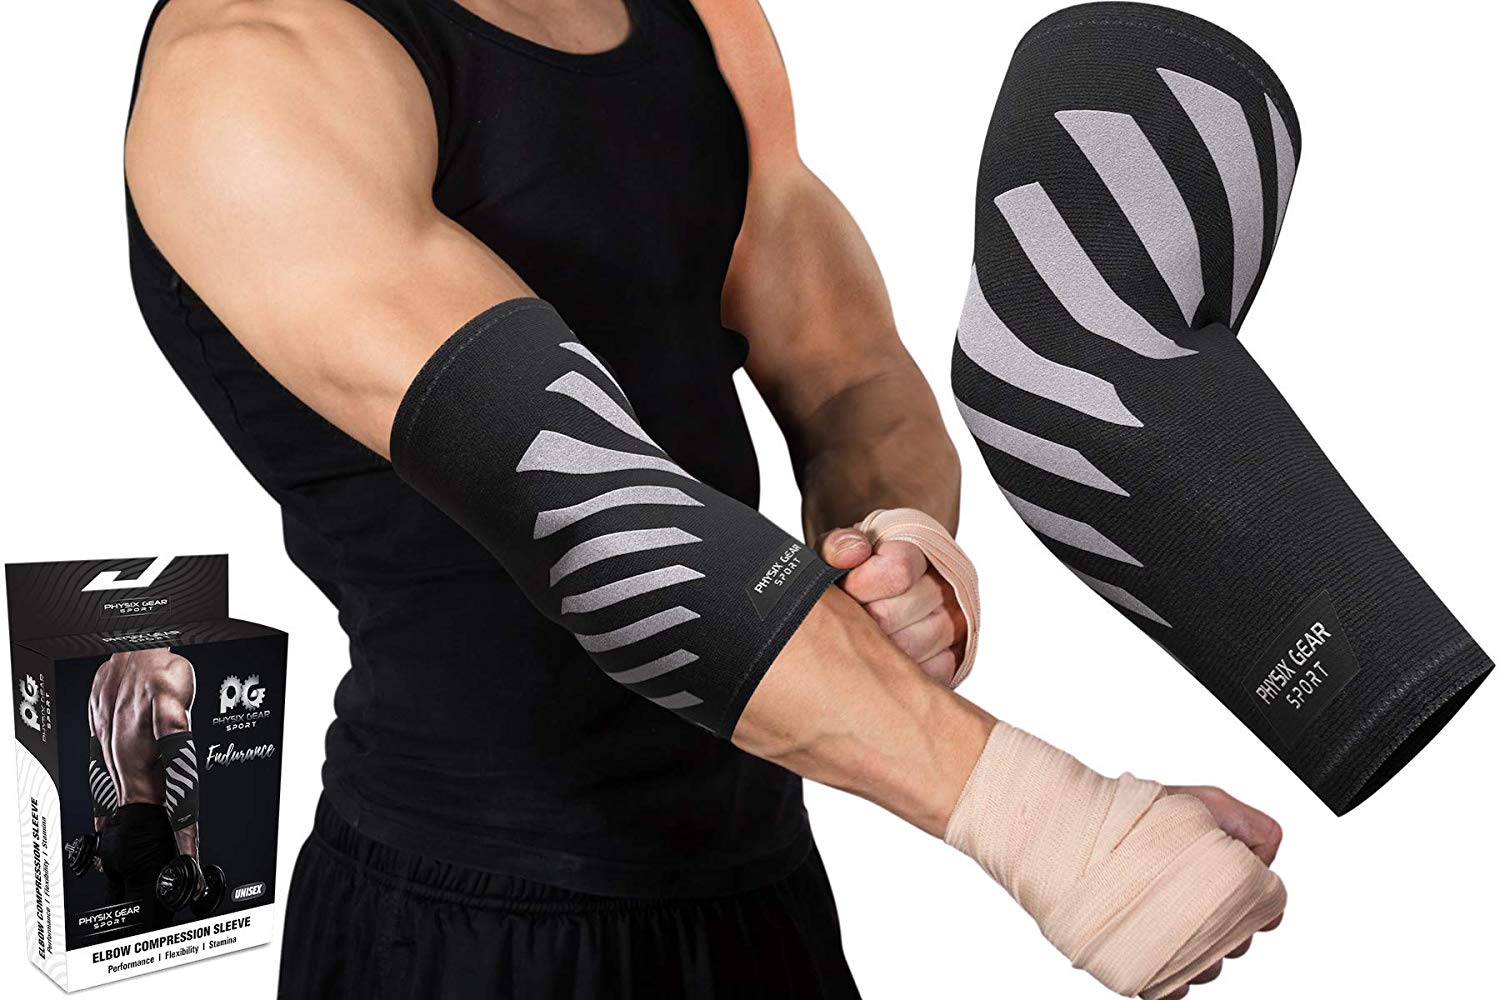 E-Sport Gear Gaming Compression Sleeve, размер l. Compression Gear Recruit Pro 2. Arm support